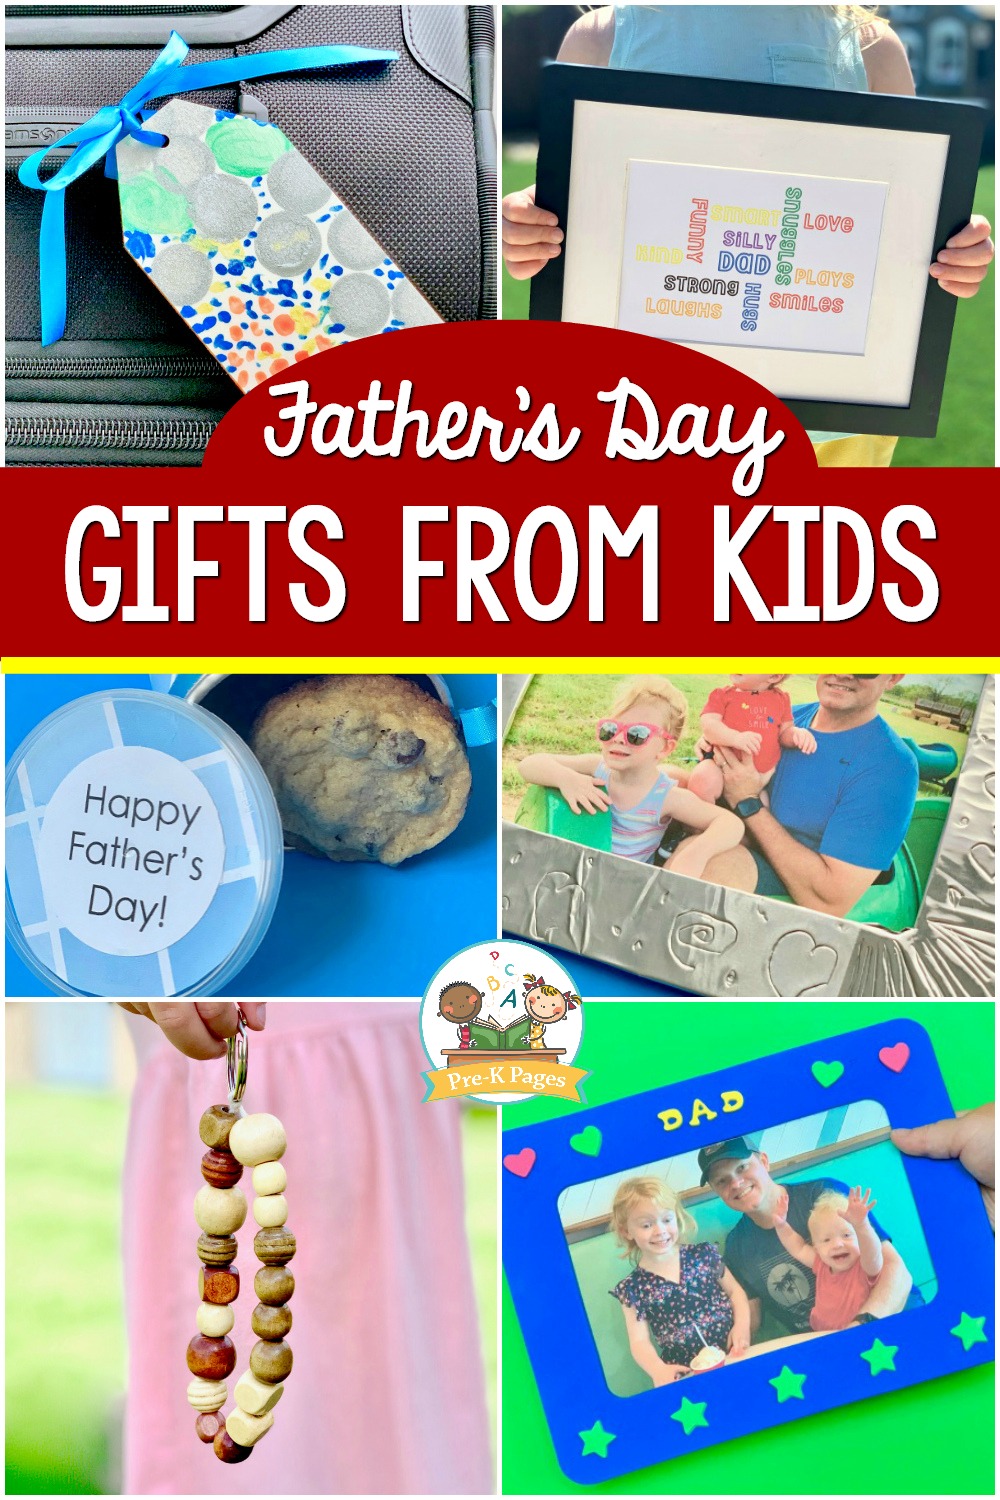 Cheap and Easy Kindergarten and Preschool Class Gifts